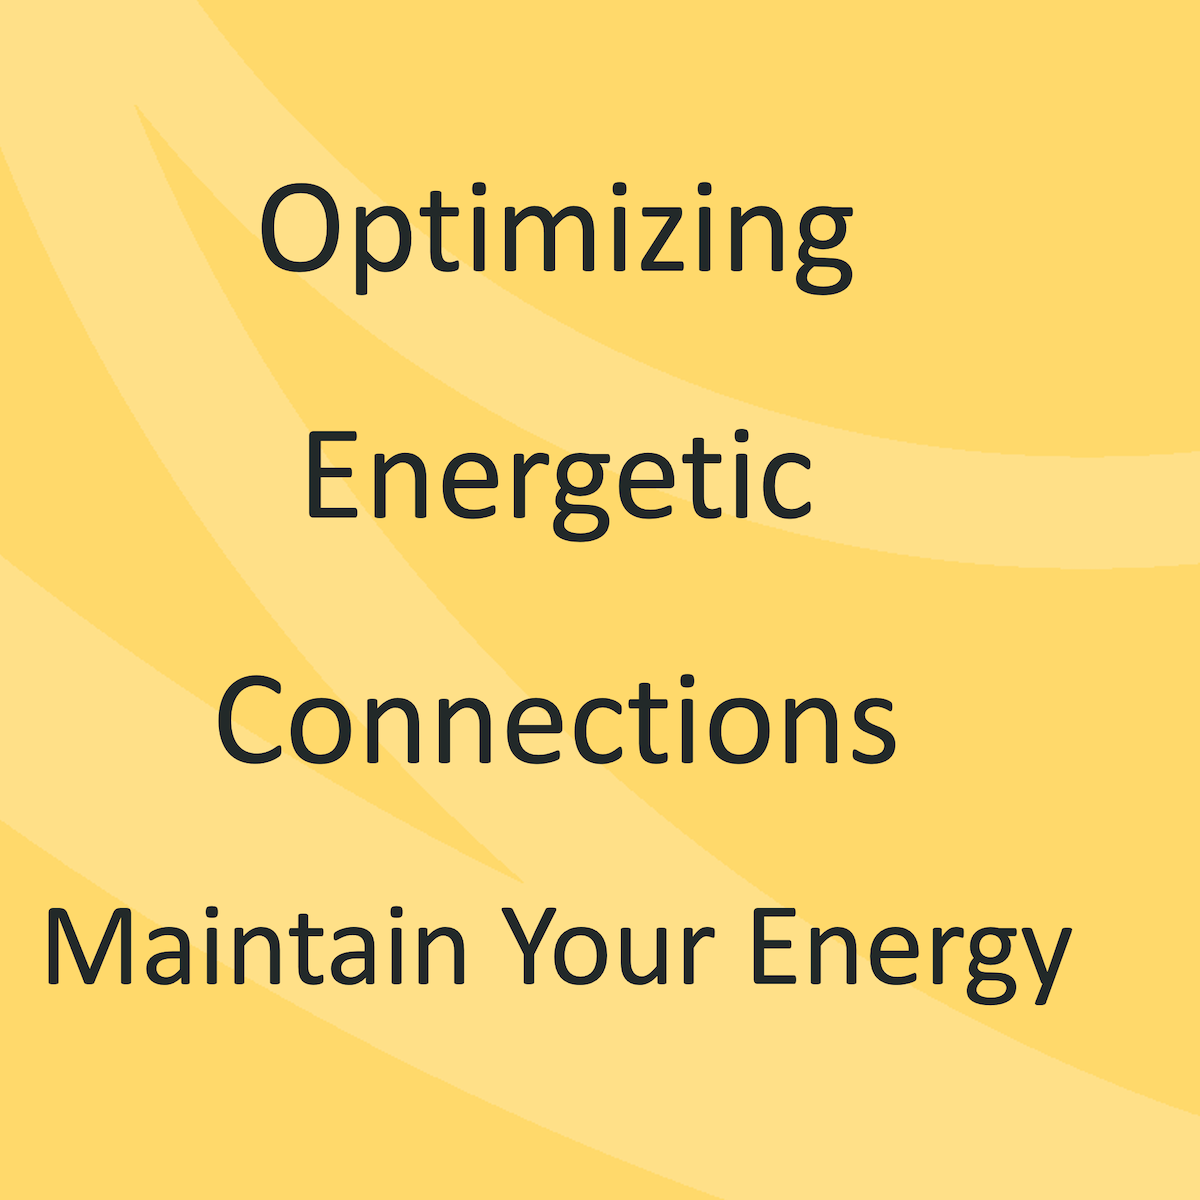 Optimize Energetic Connections | Maintain Your Energy